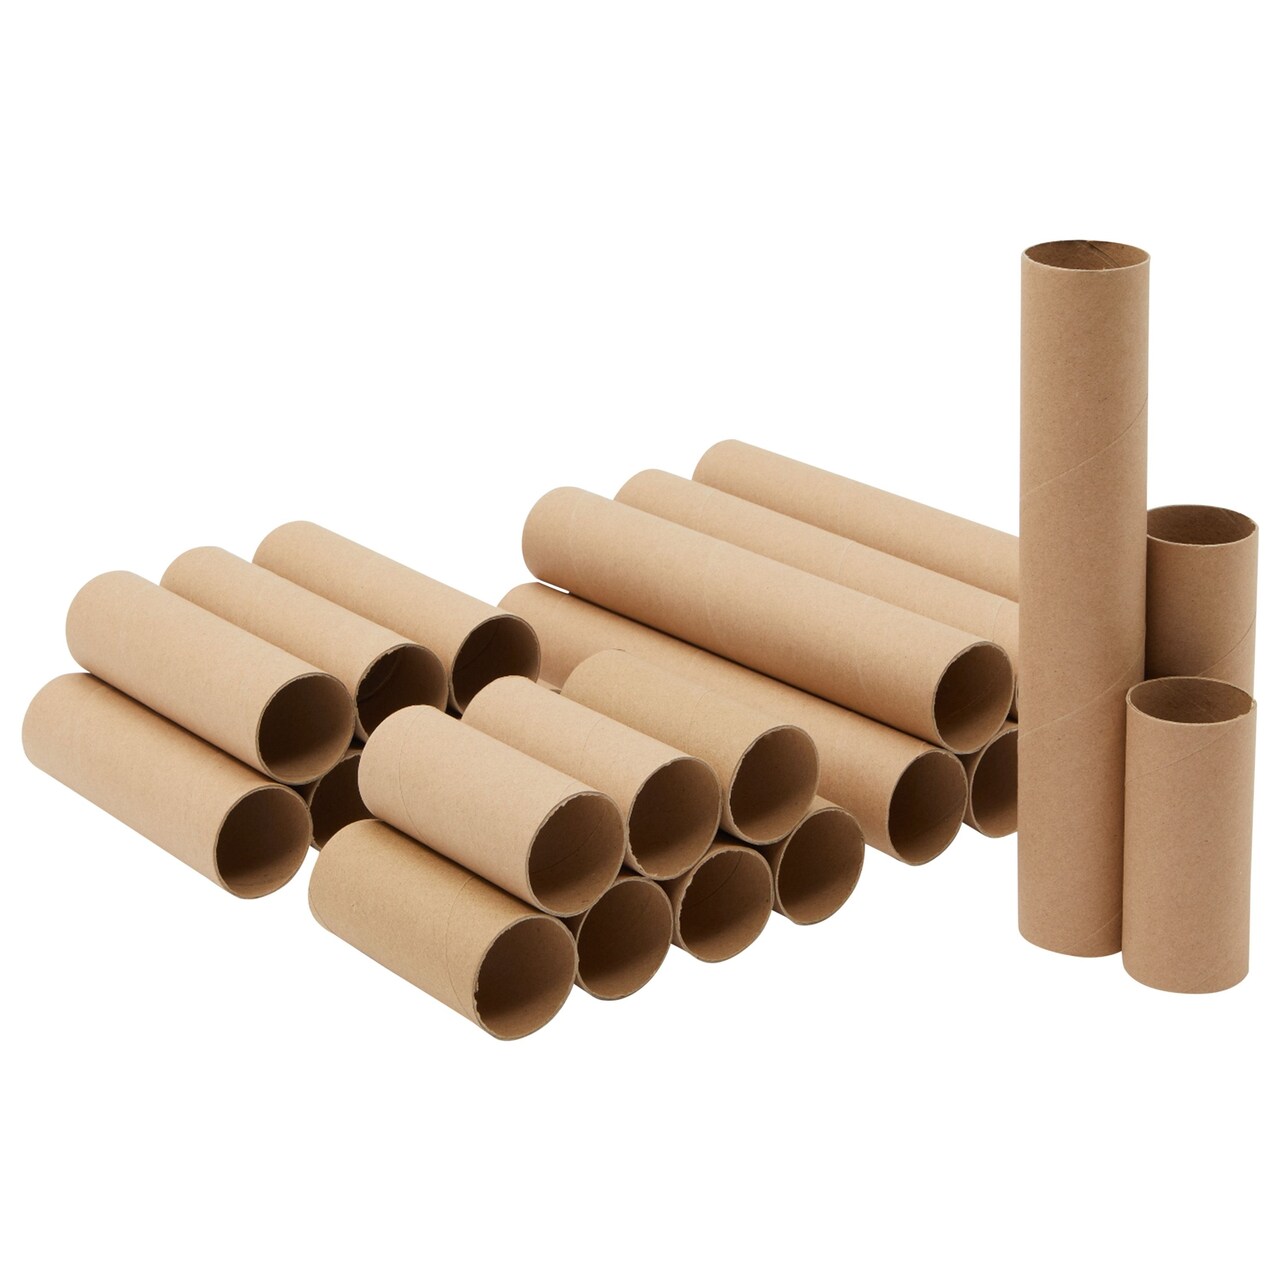 24 Brown Empty Paper Towel Rolls, 3 Size Cardboard Tubes for Crafts, DIY  Art Projects (4, 6, and 10 Inches)